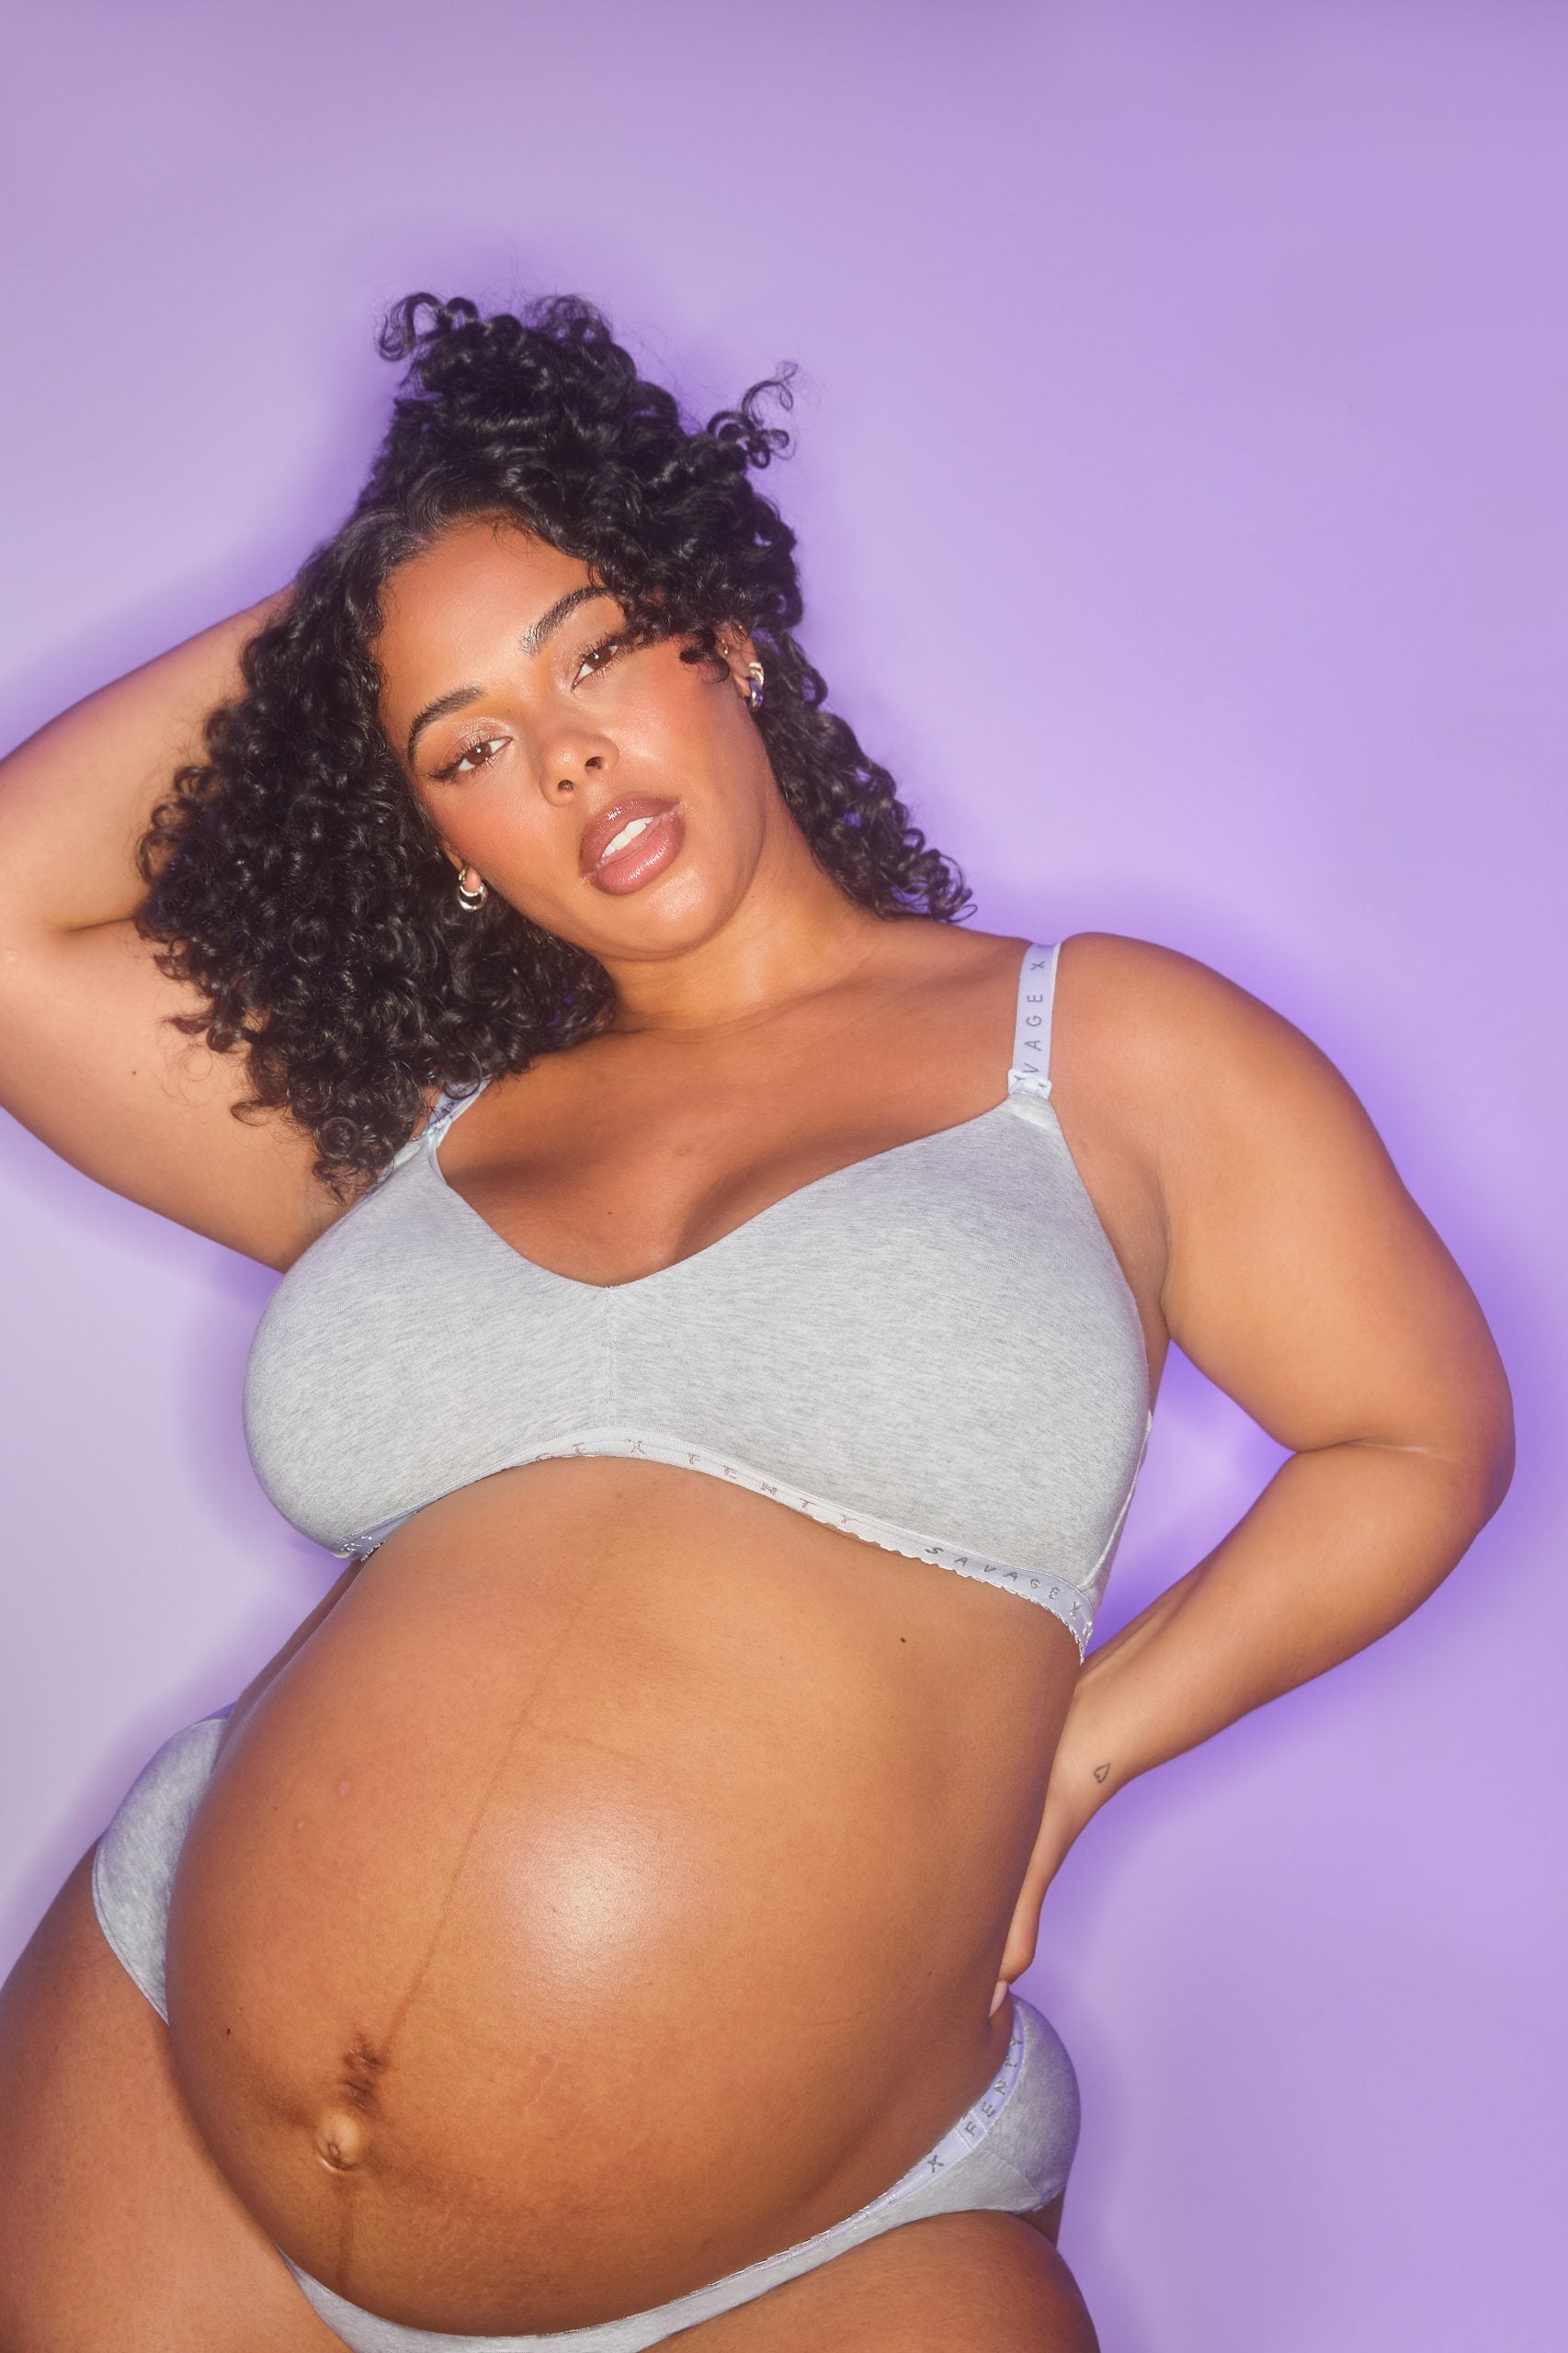 Savage Not Sorry Lace Maternity Bralette in Black